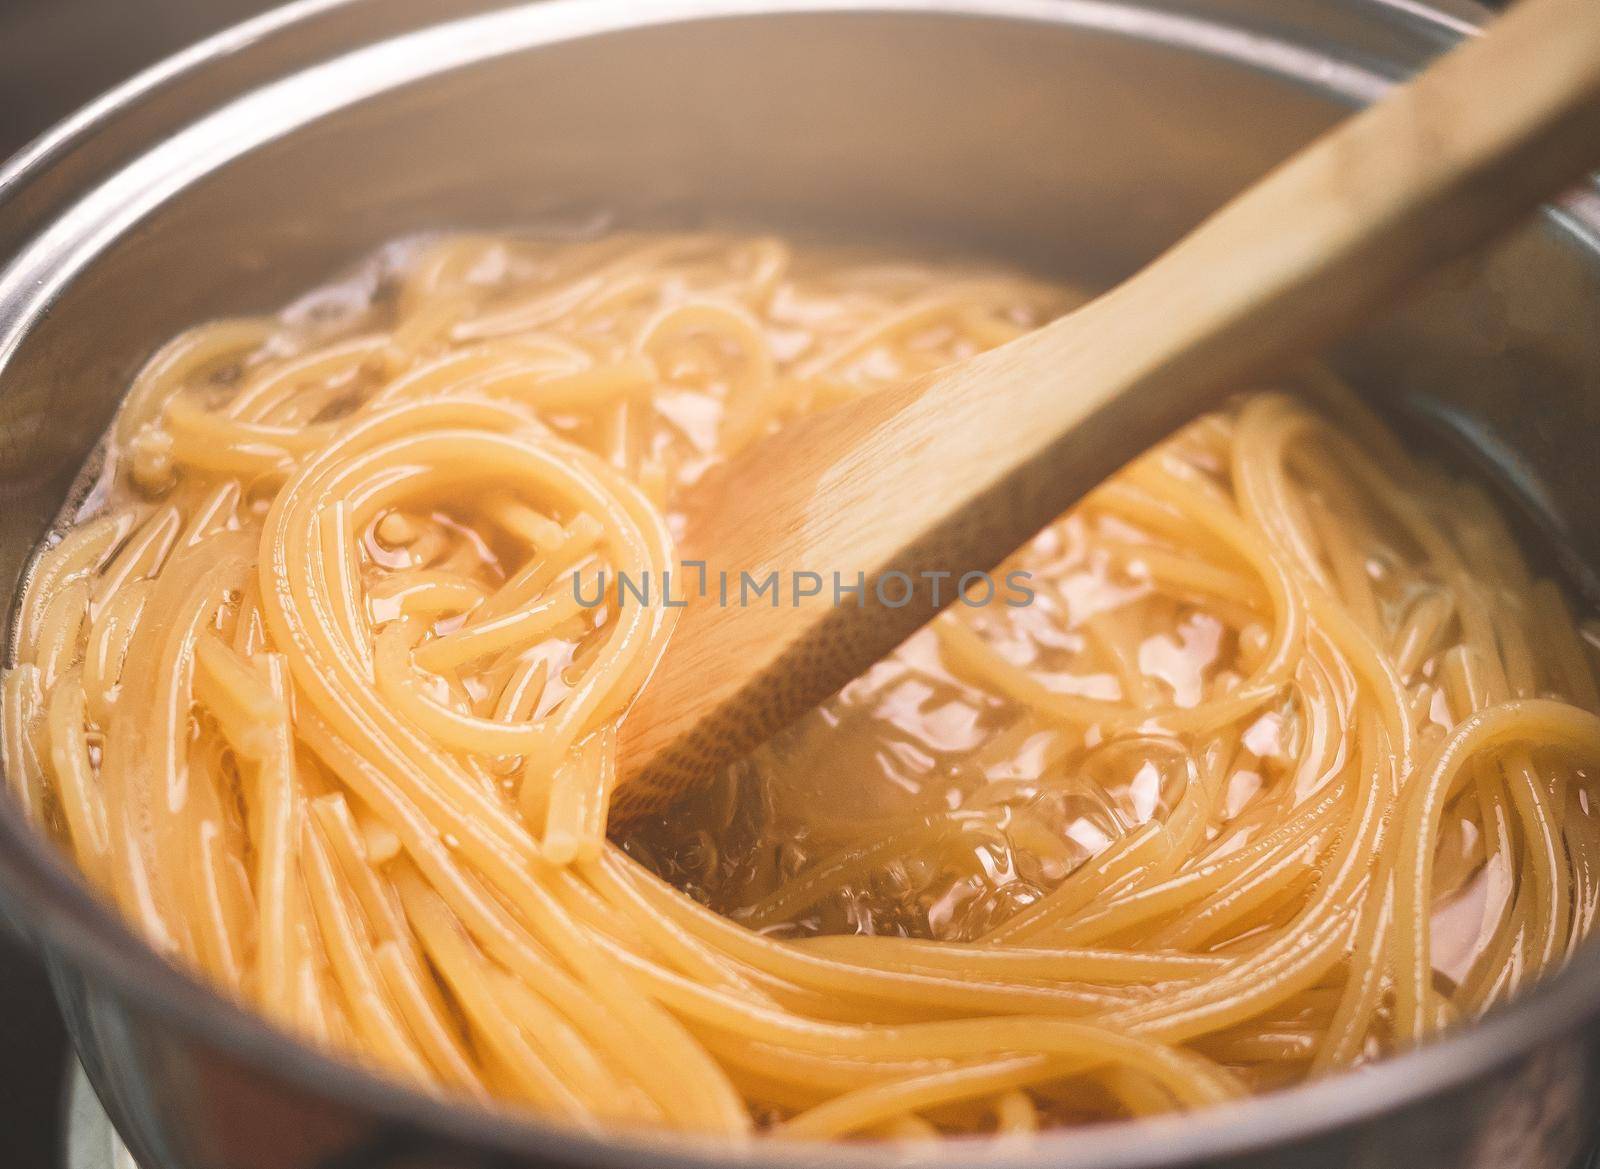 Raw spaghetti is being cooked in boiling water in a kitchen pot. Healthy Italian Food and Cooking concepts.